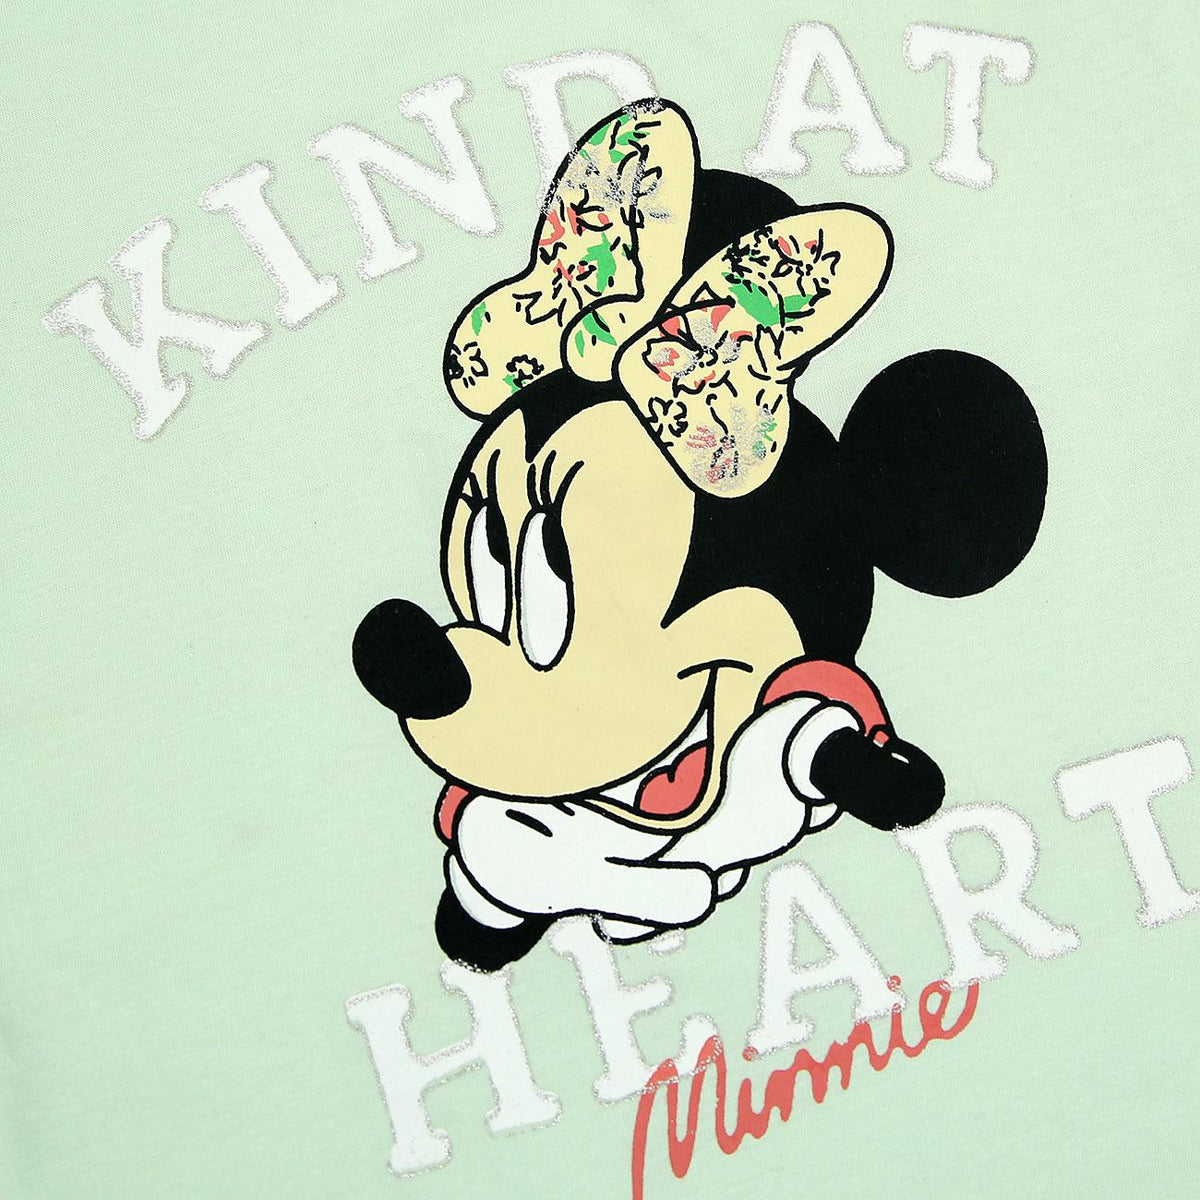 Girls Soft Cotton Minnie Mouse Printed T-Shirt 9 MONTH - 10 YRS (MI-11409) - Brands River